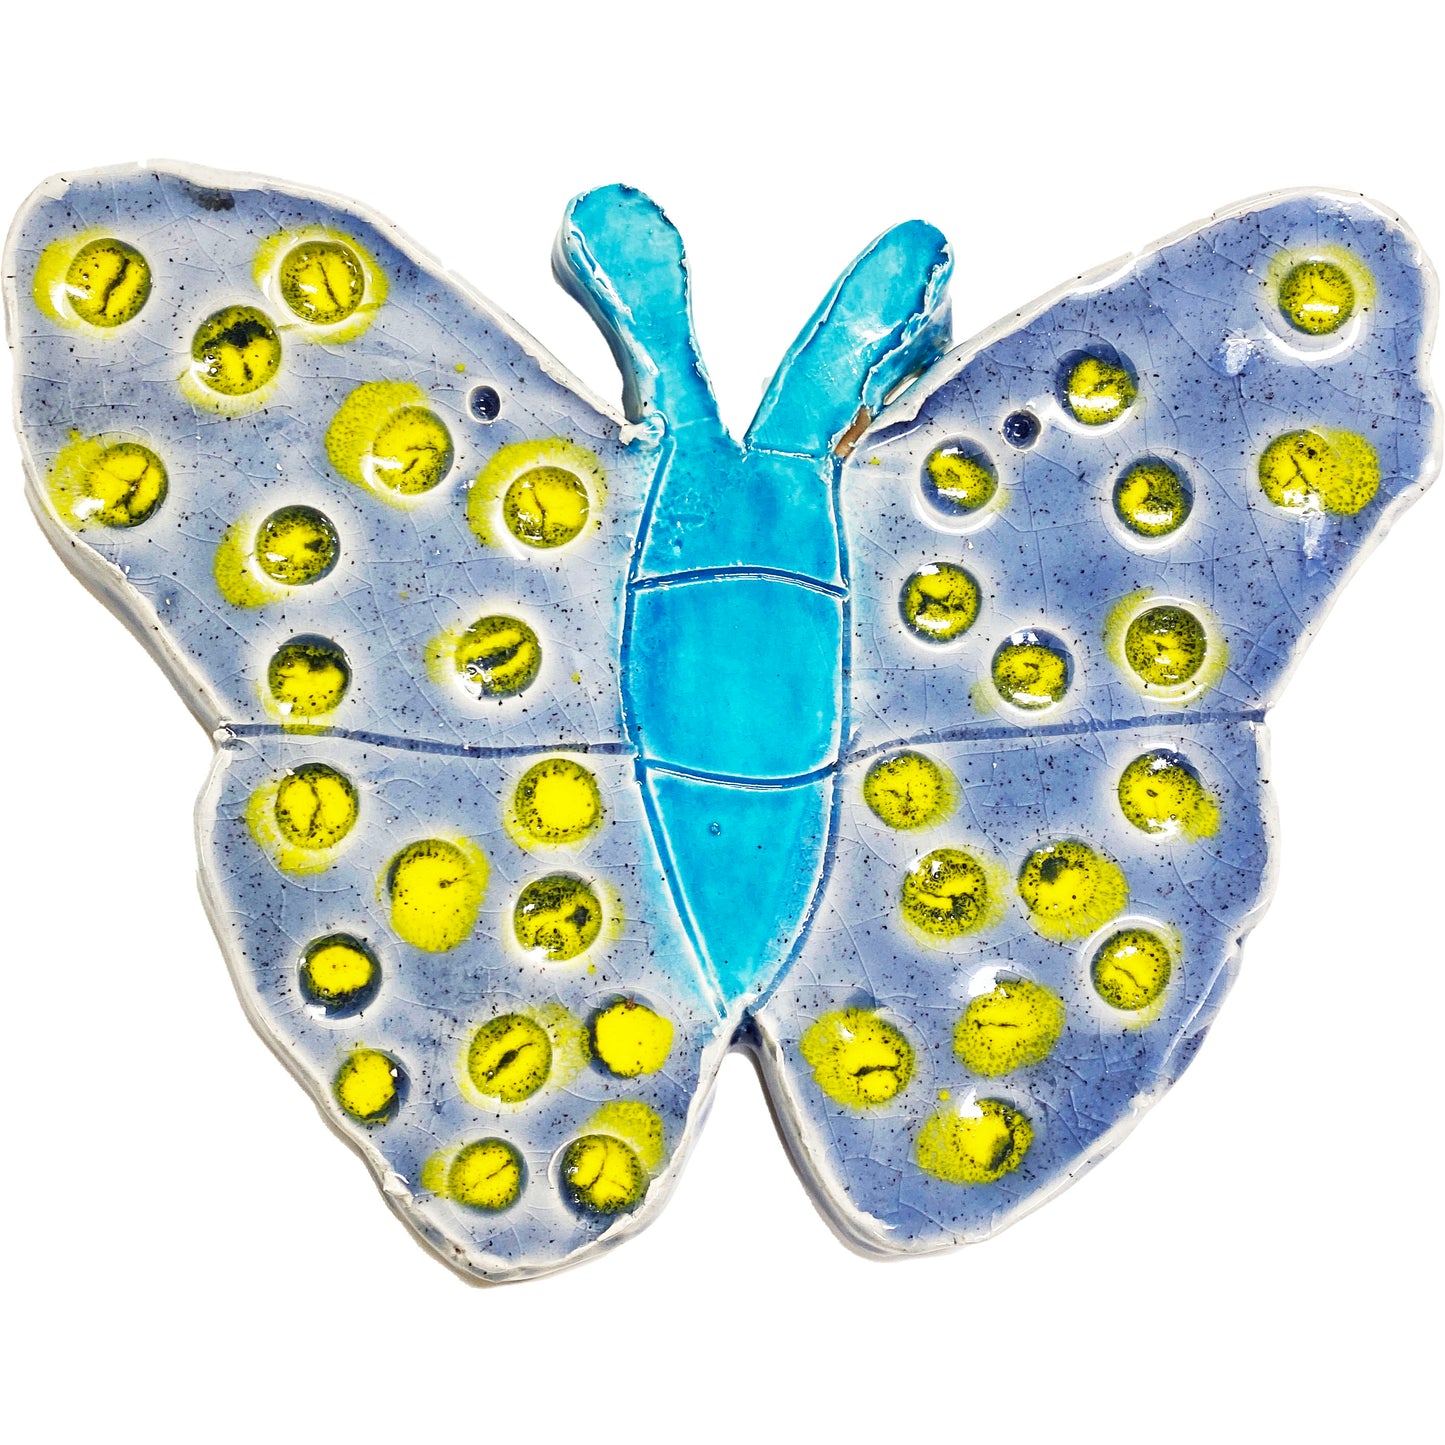 Ceramic Arts Handmade Clay Crafts Glazed 8-inch x 7-inch Butterfly made by Emily Knoles